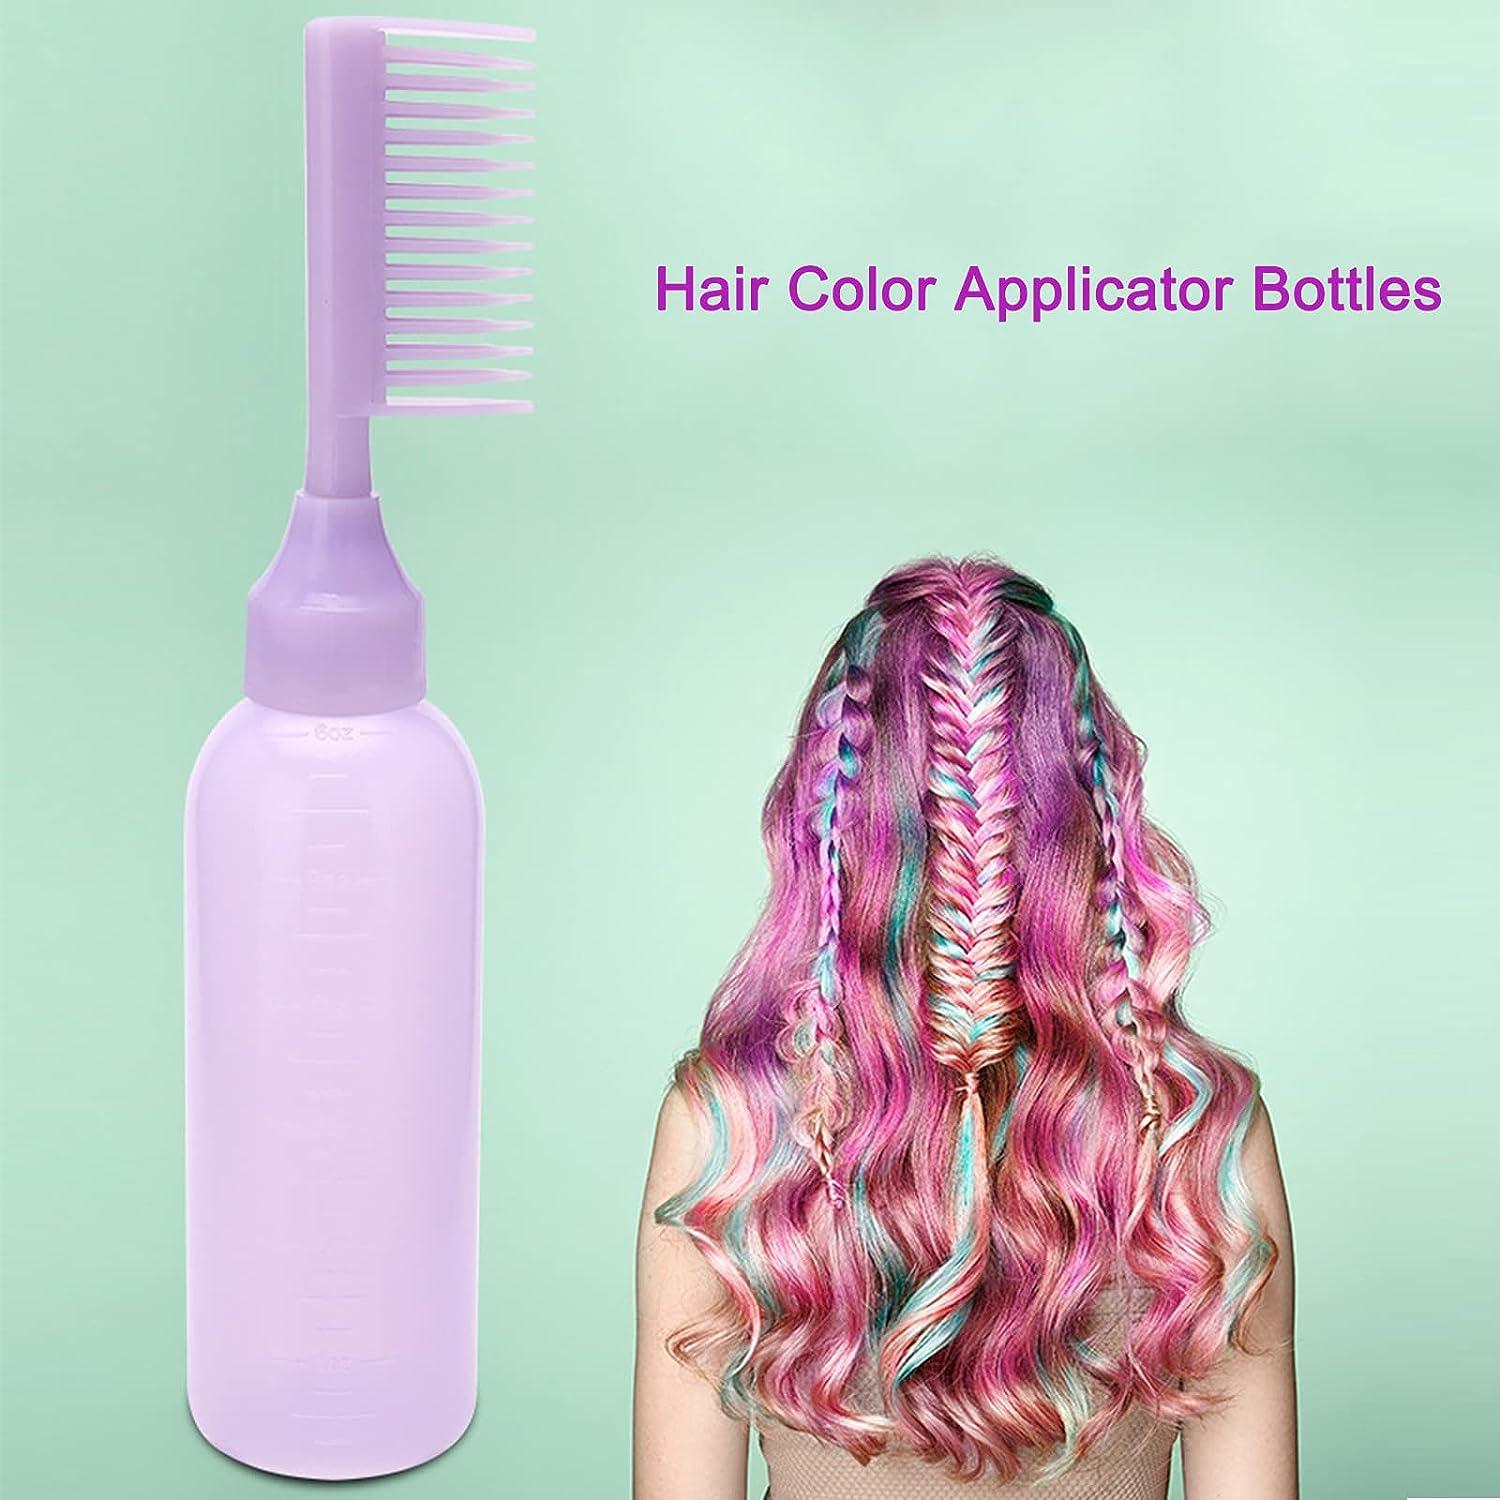 1 Hair Root Comb Color Applicator Bottle, 6 oz measuring scales NEW FREE  SHIP